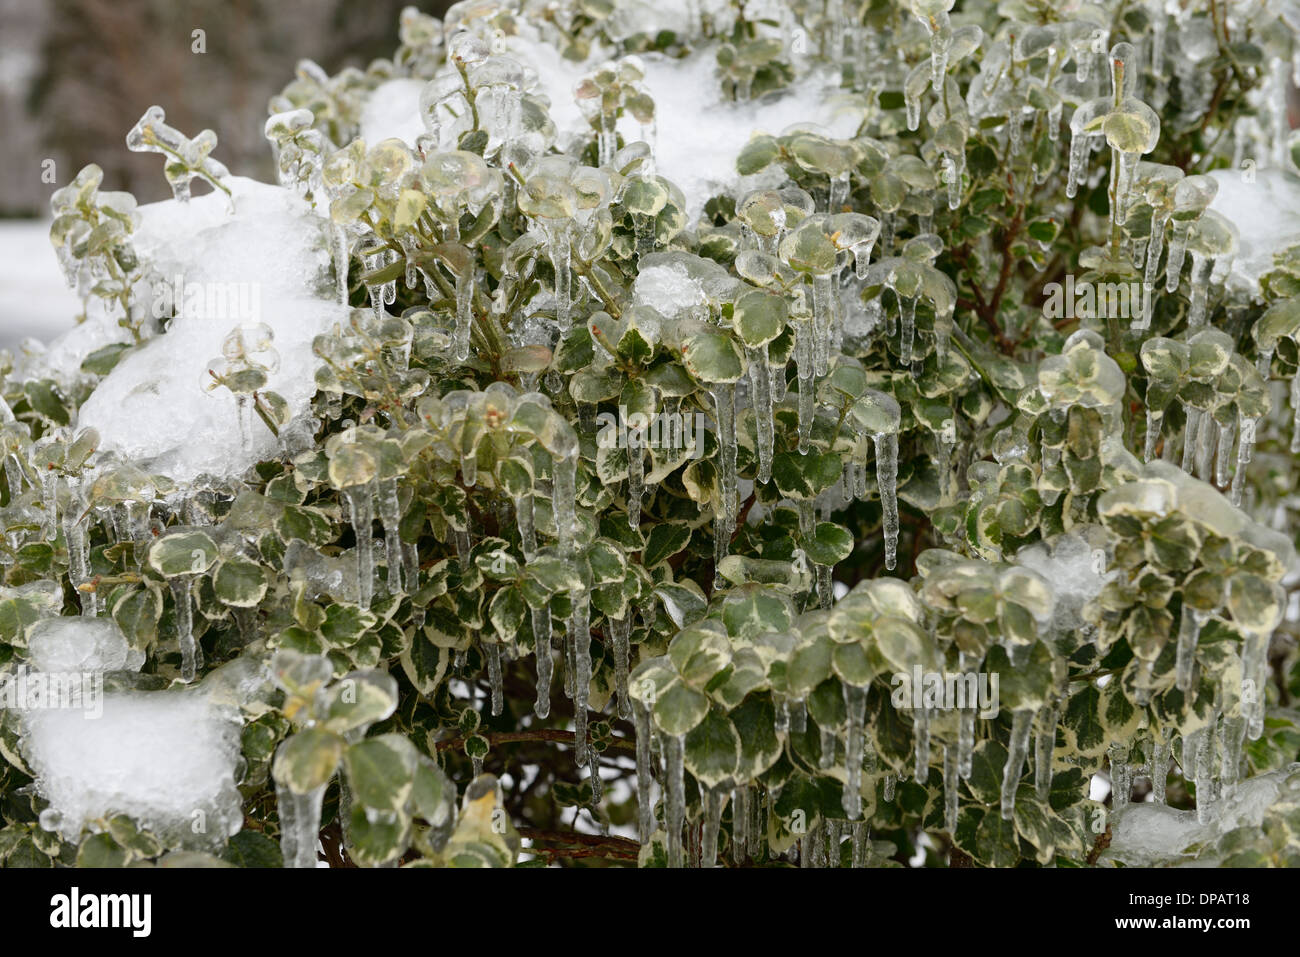 Ice and icicles on Euonymus bush after a freezing rain ice storm in Toronto Canada Stock Photo